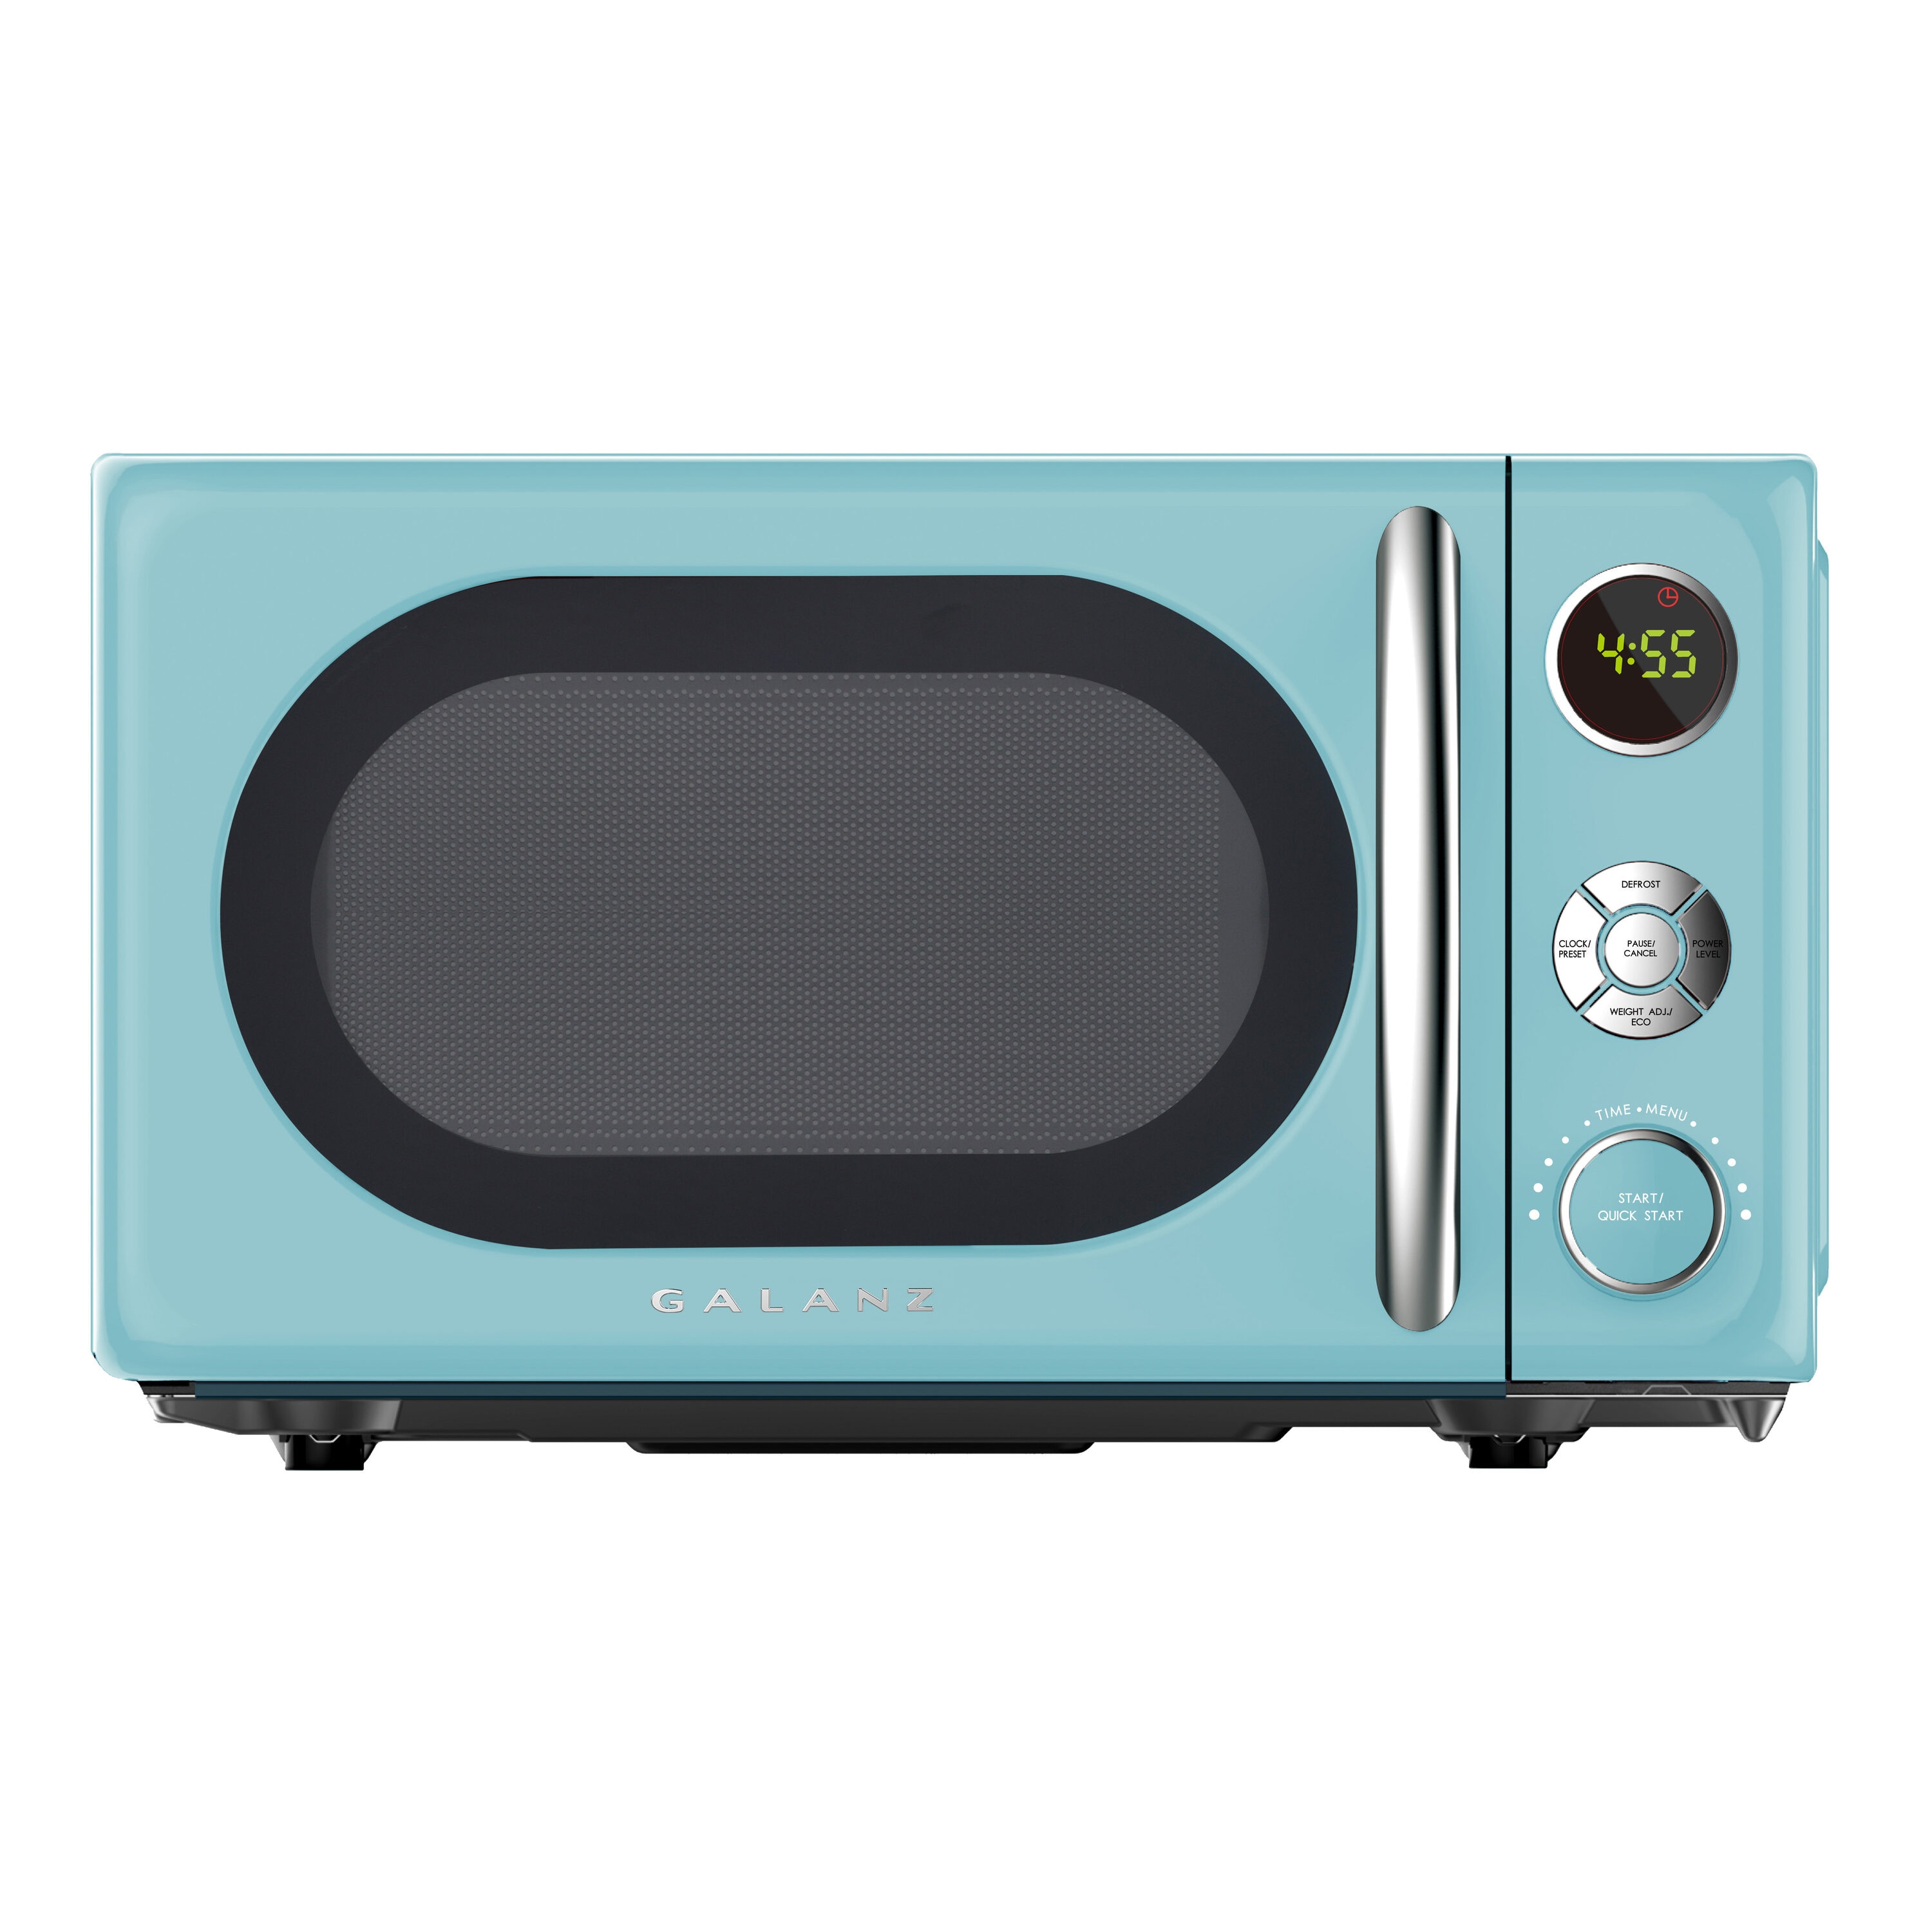 Live - Vintage style and durable cute Microwave Oven!